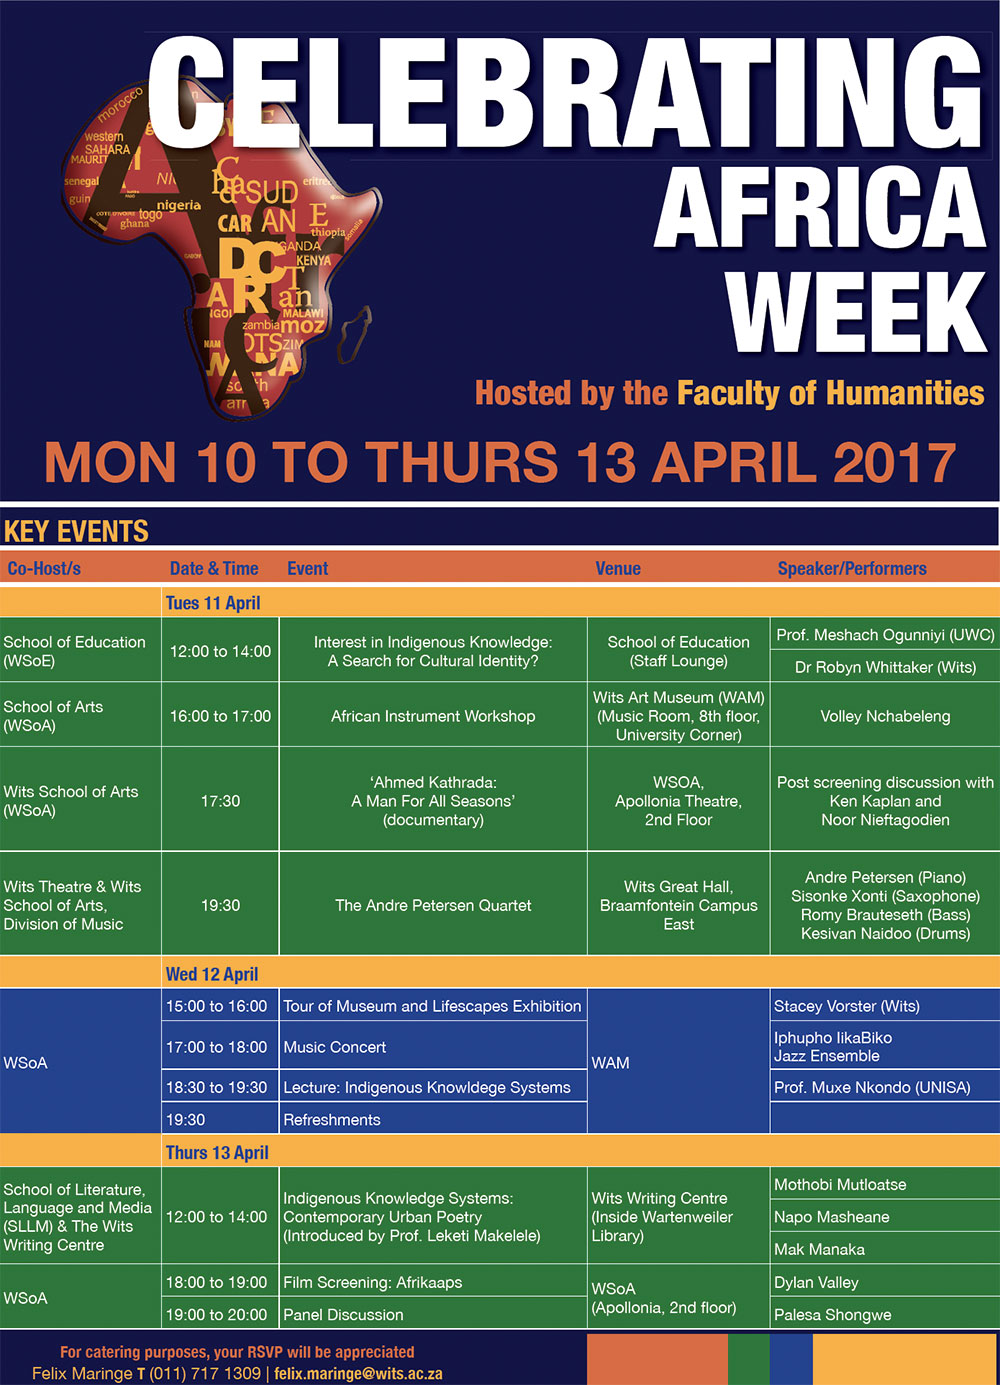 Africa Week hosted by the Faculty of Humanities